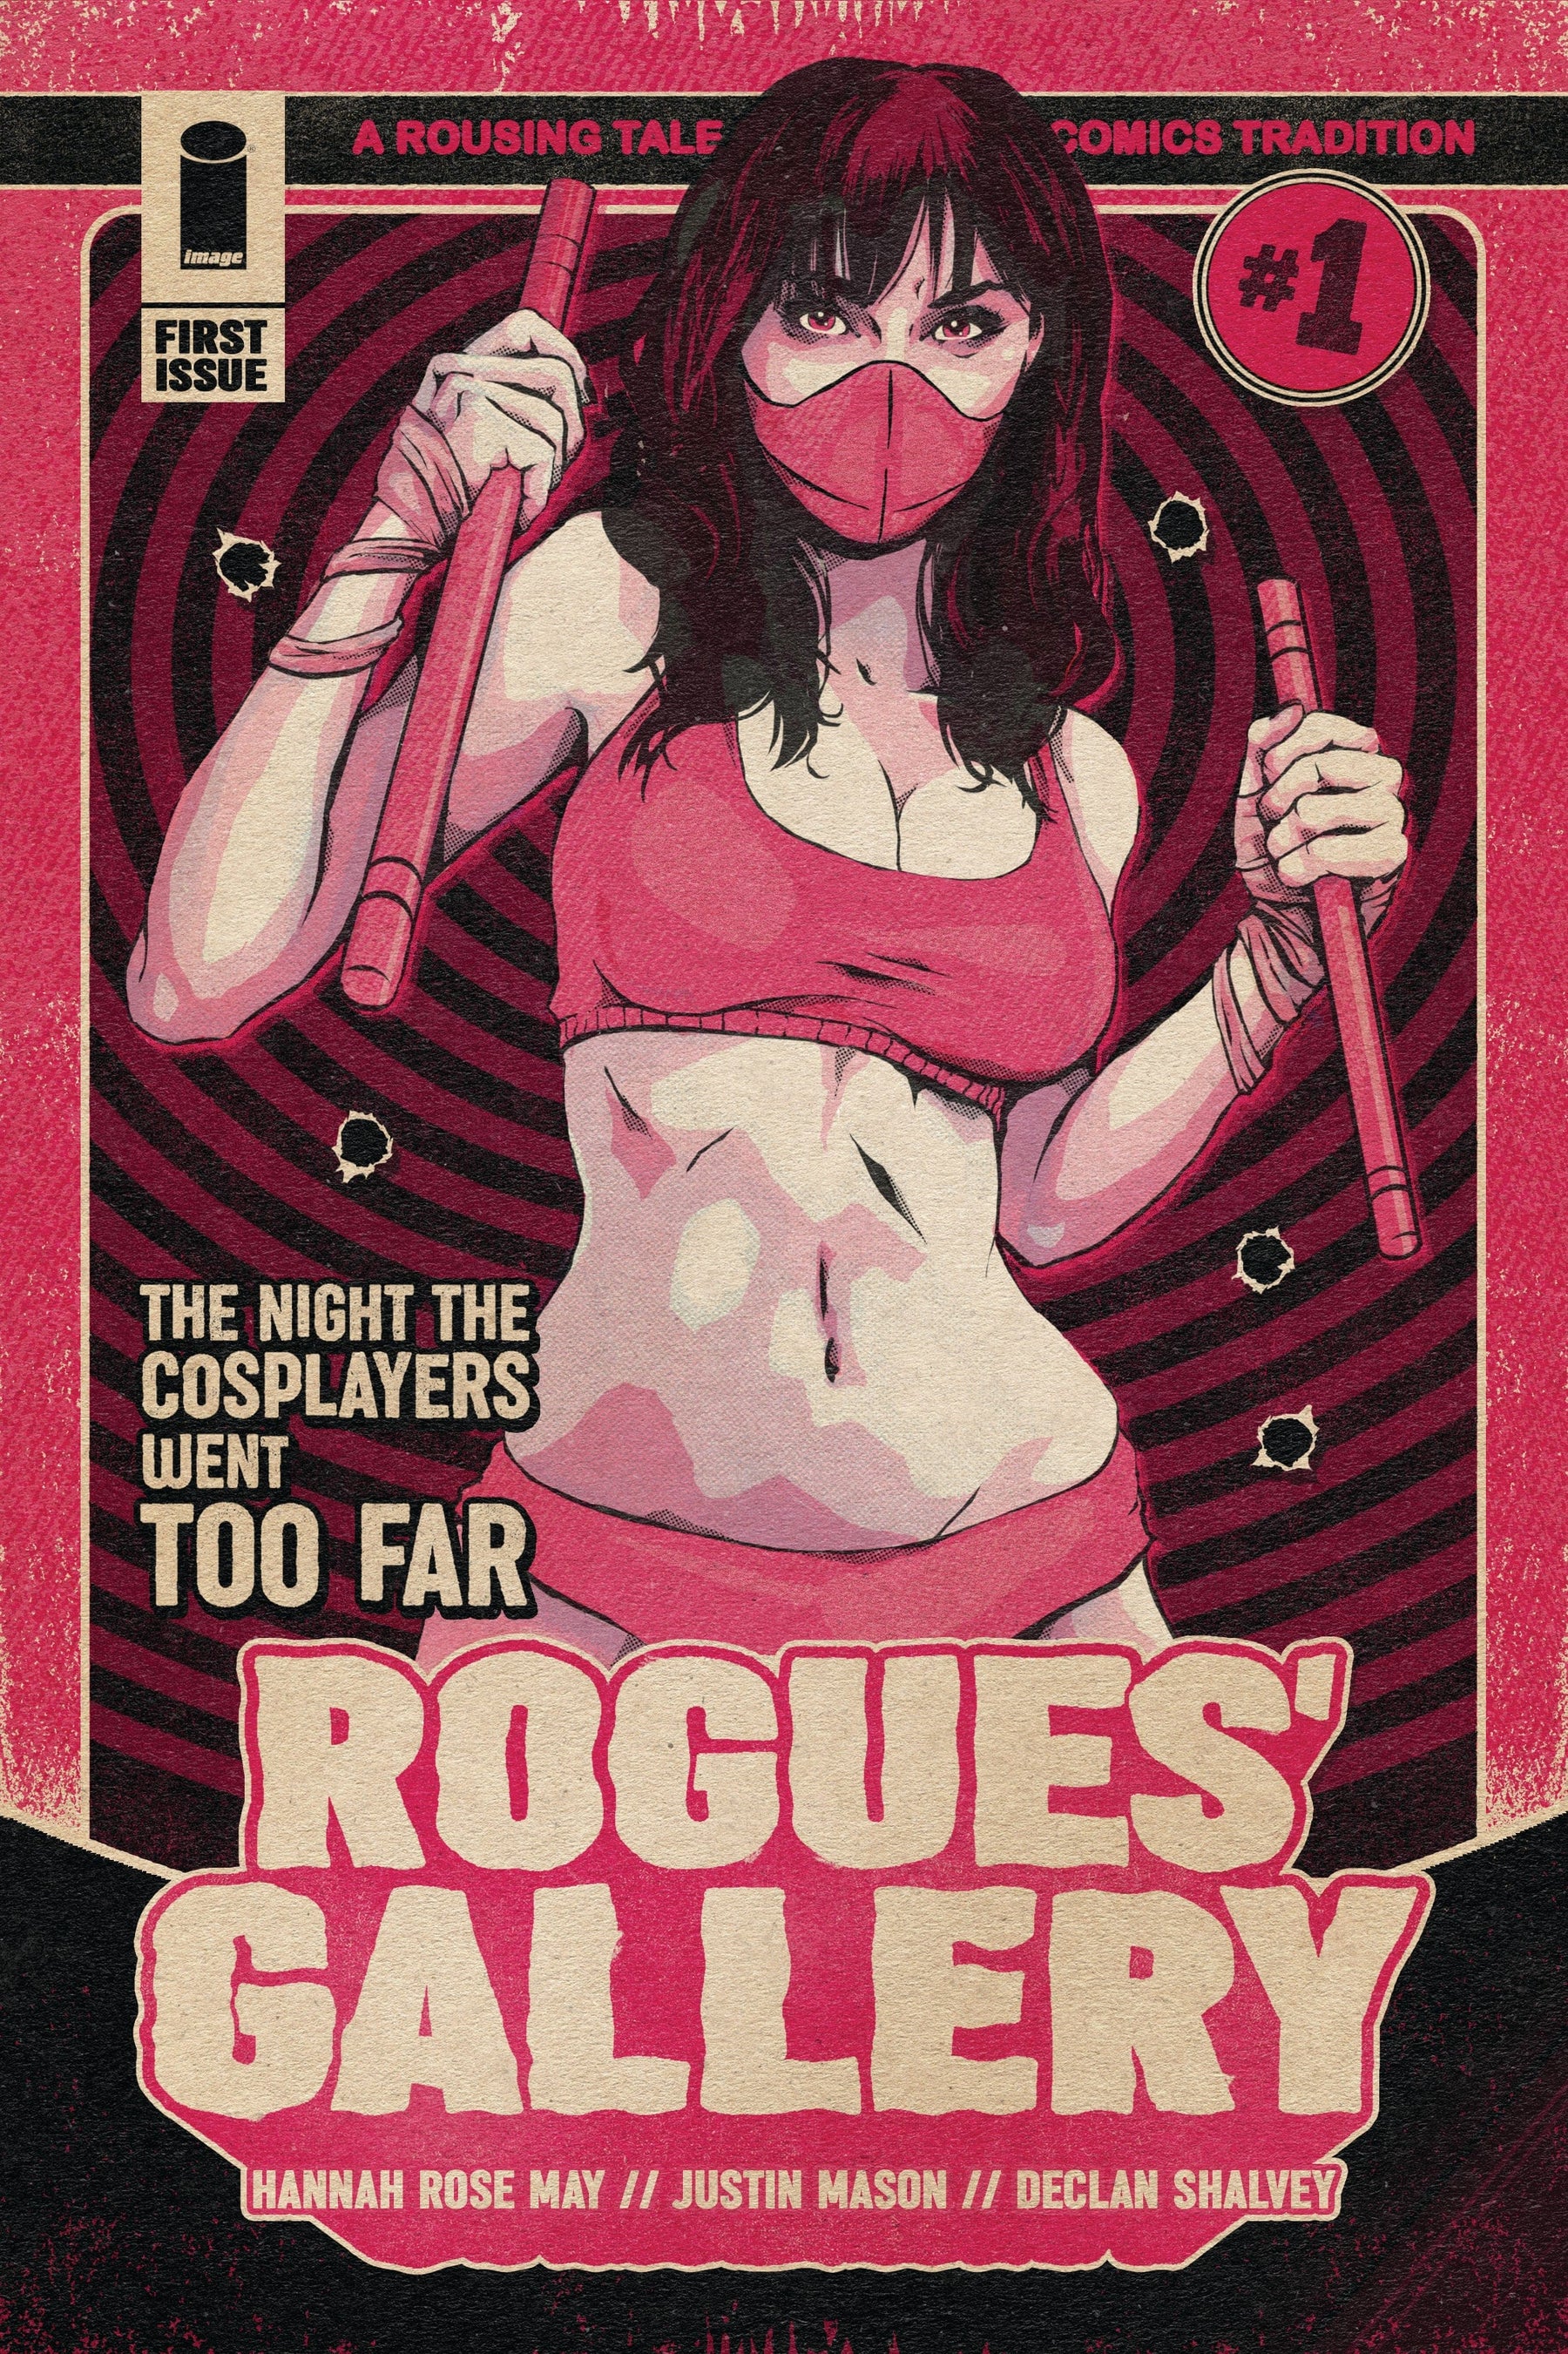 ROGUES GALLERY #1 THIRD EYE EXCLUSIVE VARIANT BY FLOPS!